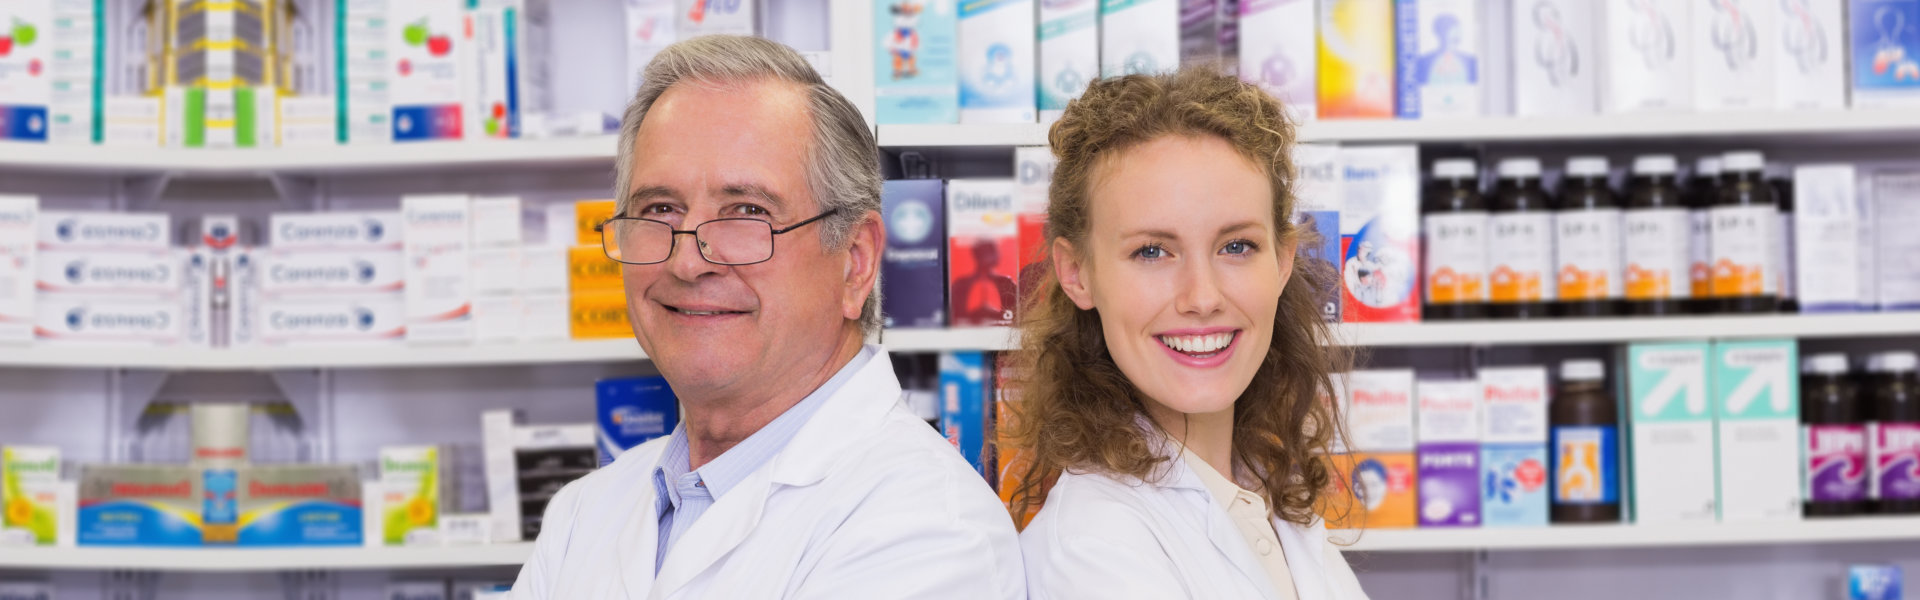 Pharmacists smiling while being side by side with a lot of medicine in the background